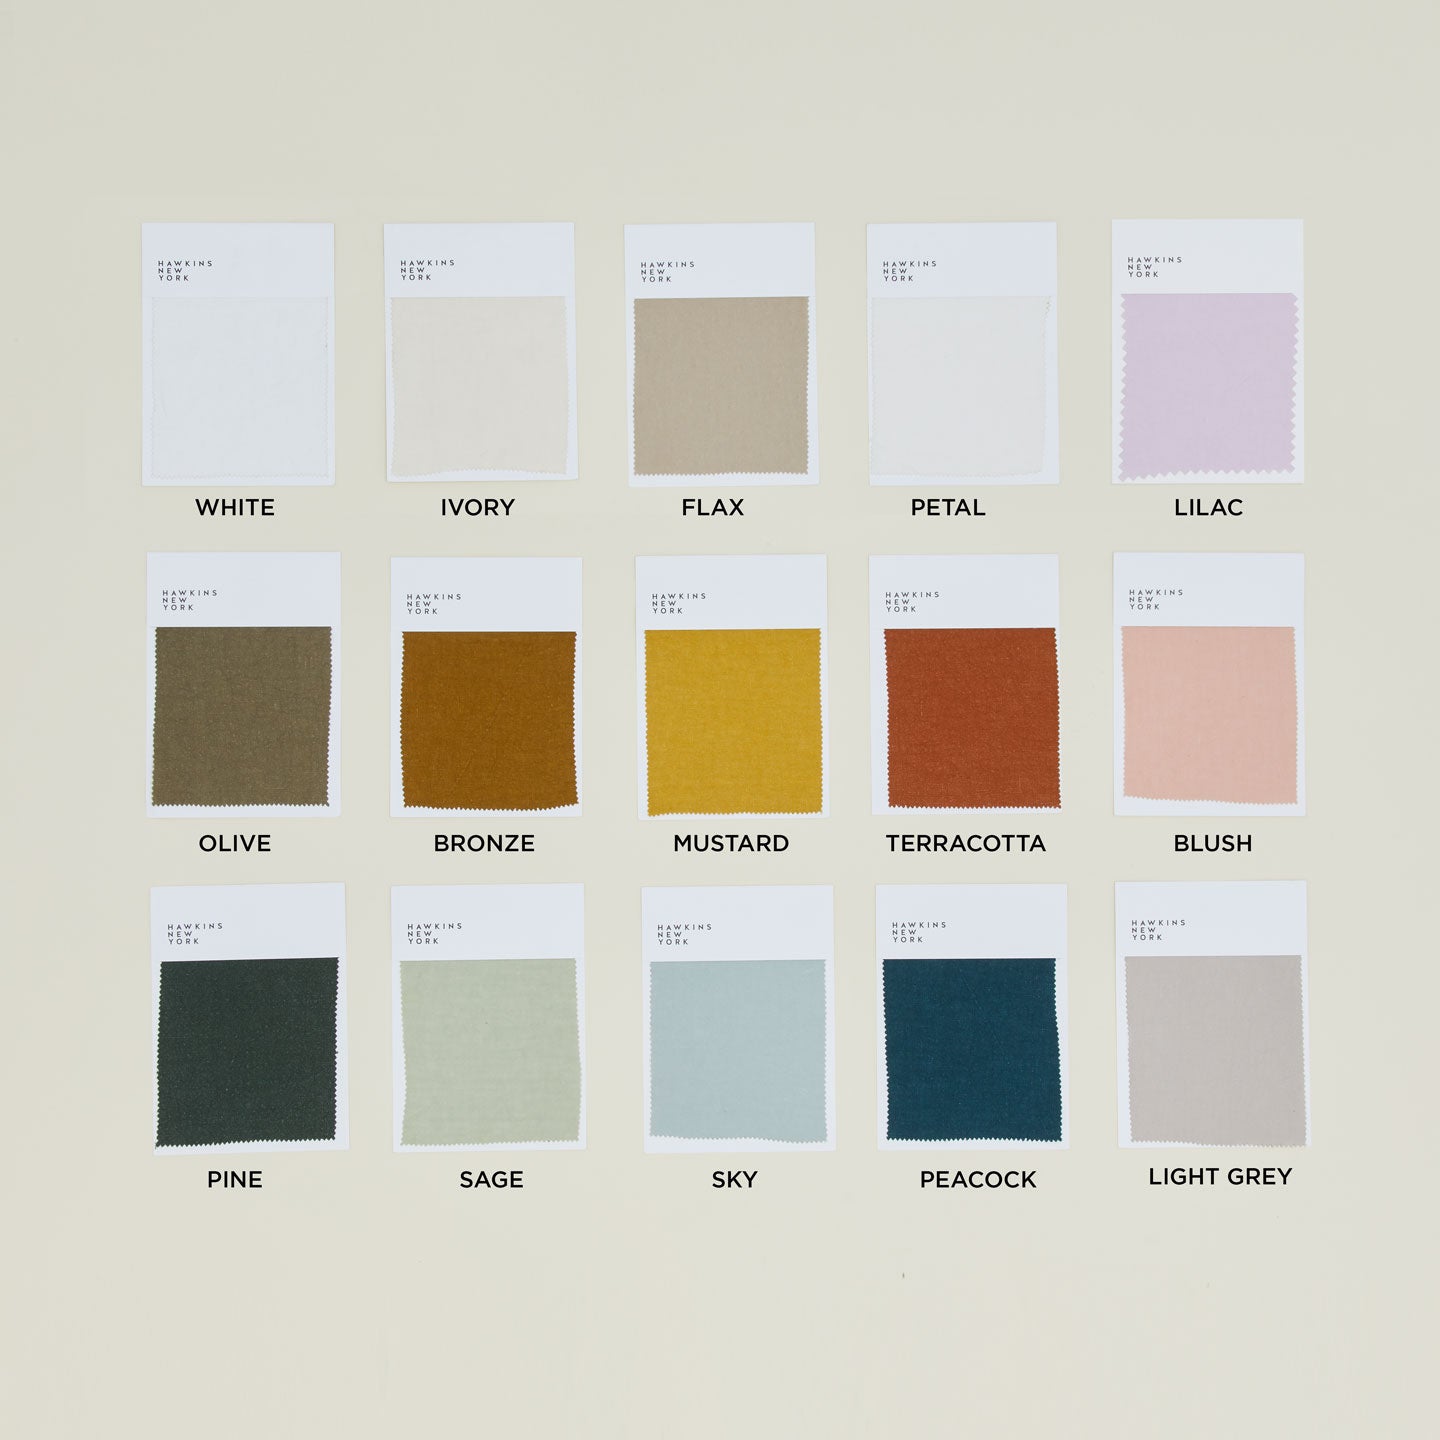 Group of Linen Swatches in various colors.